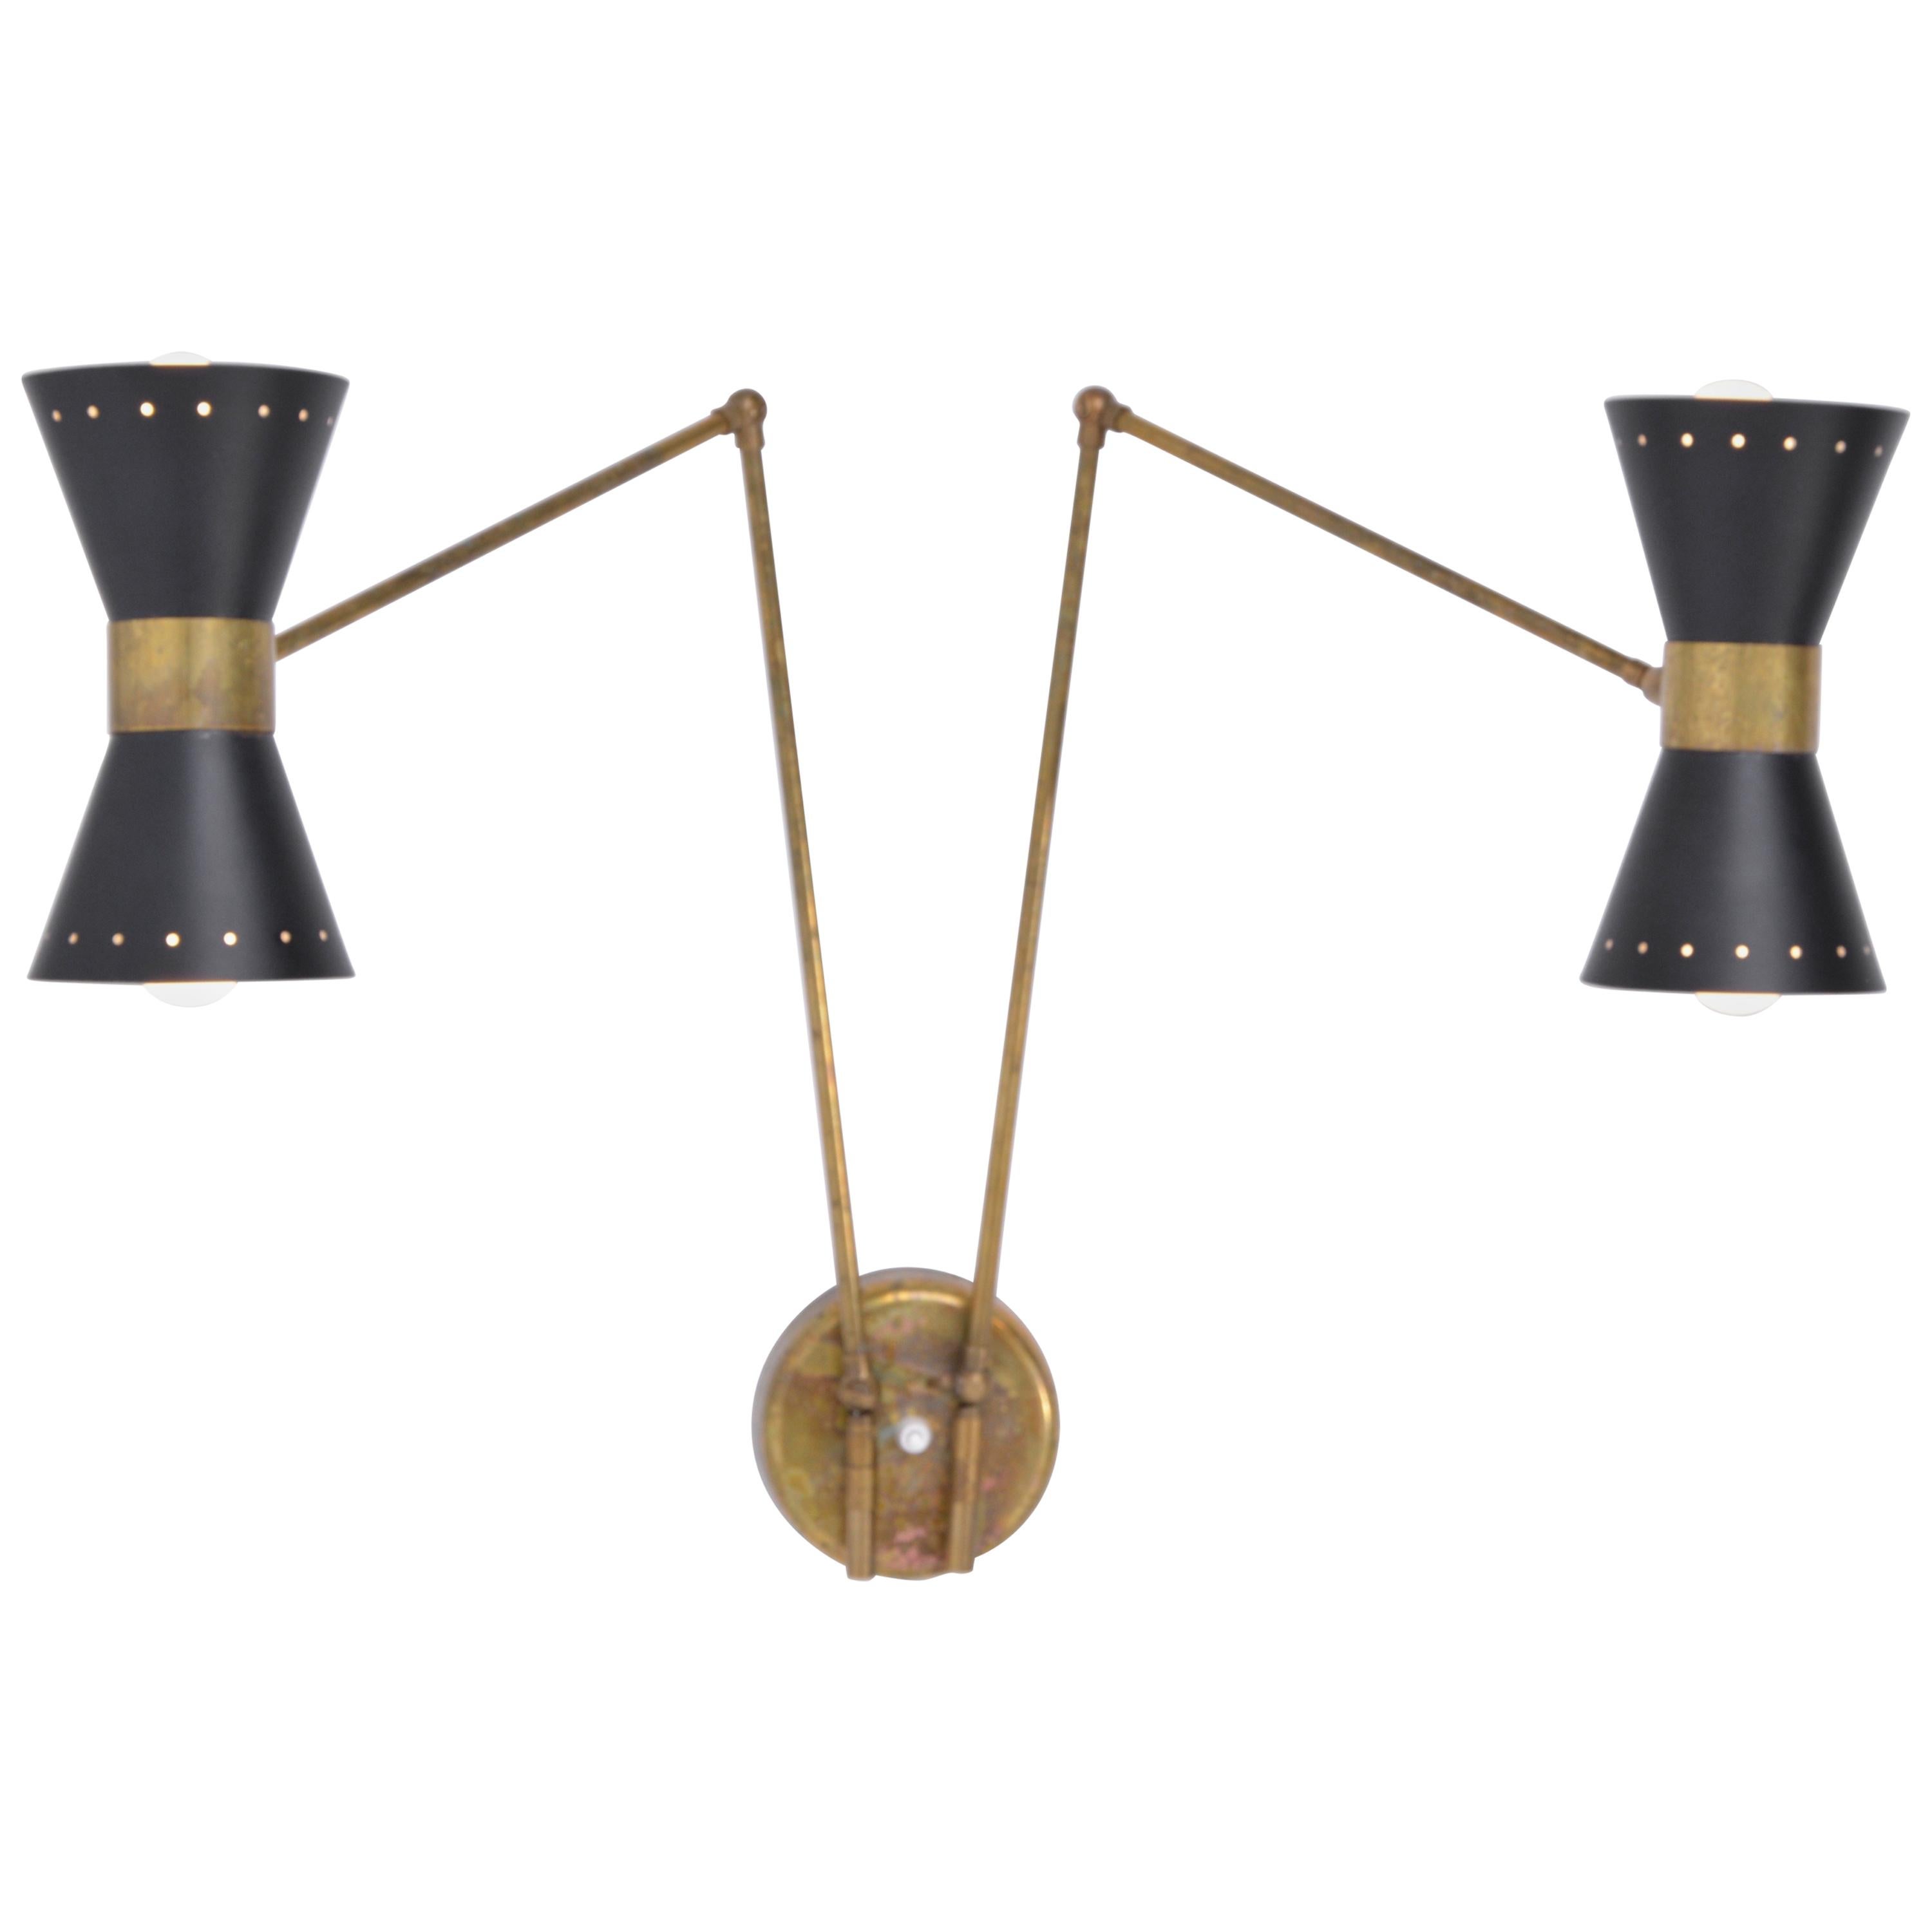 Italian Two-Armed Adjustable Metal Wall Lamp with Brass Elements